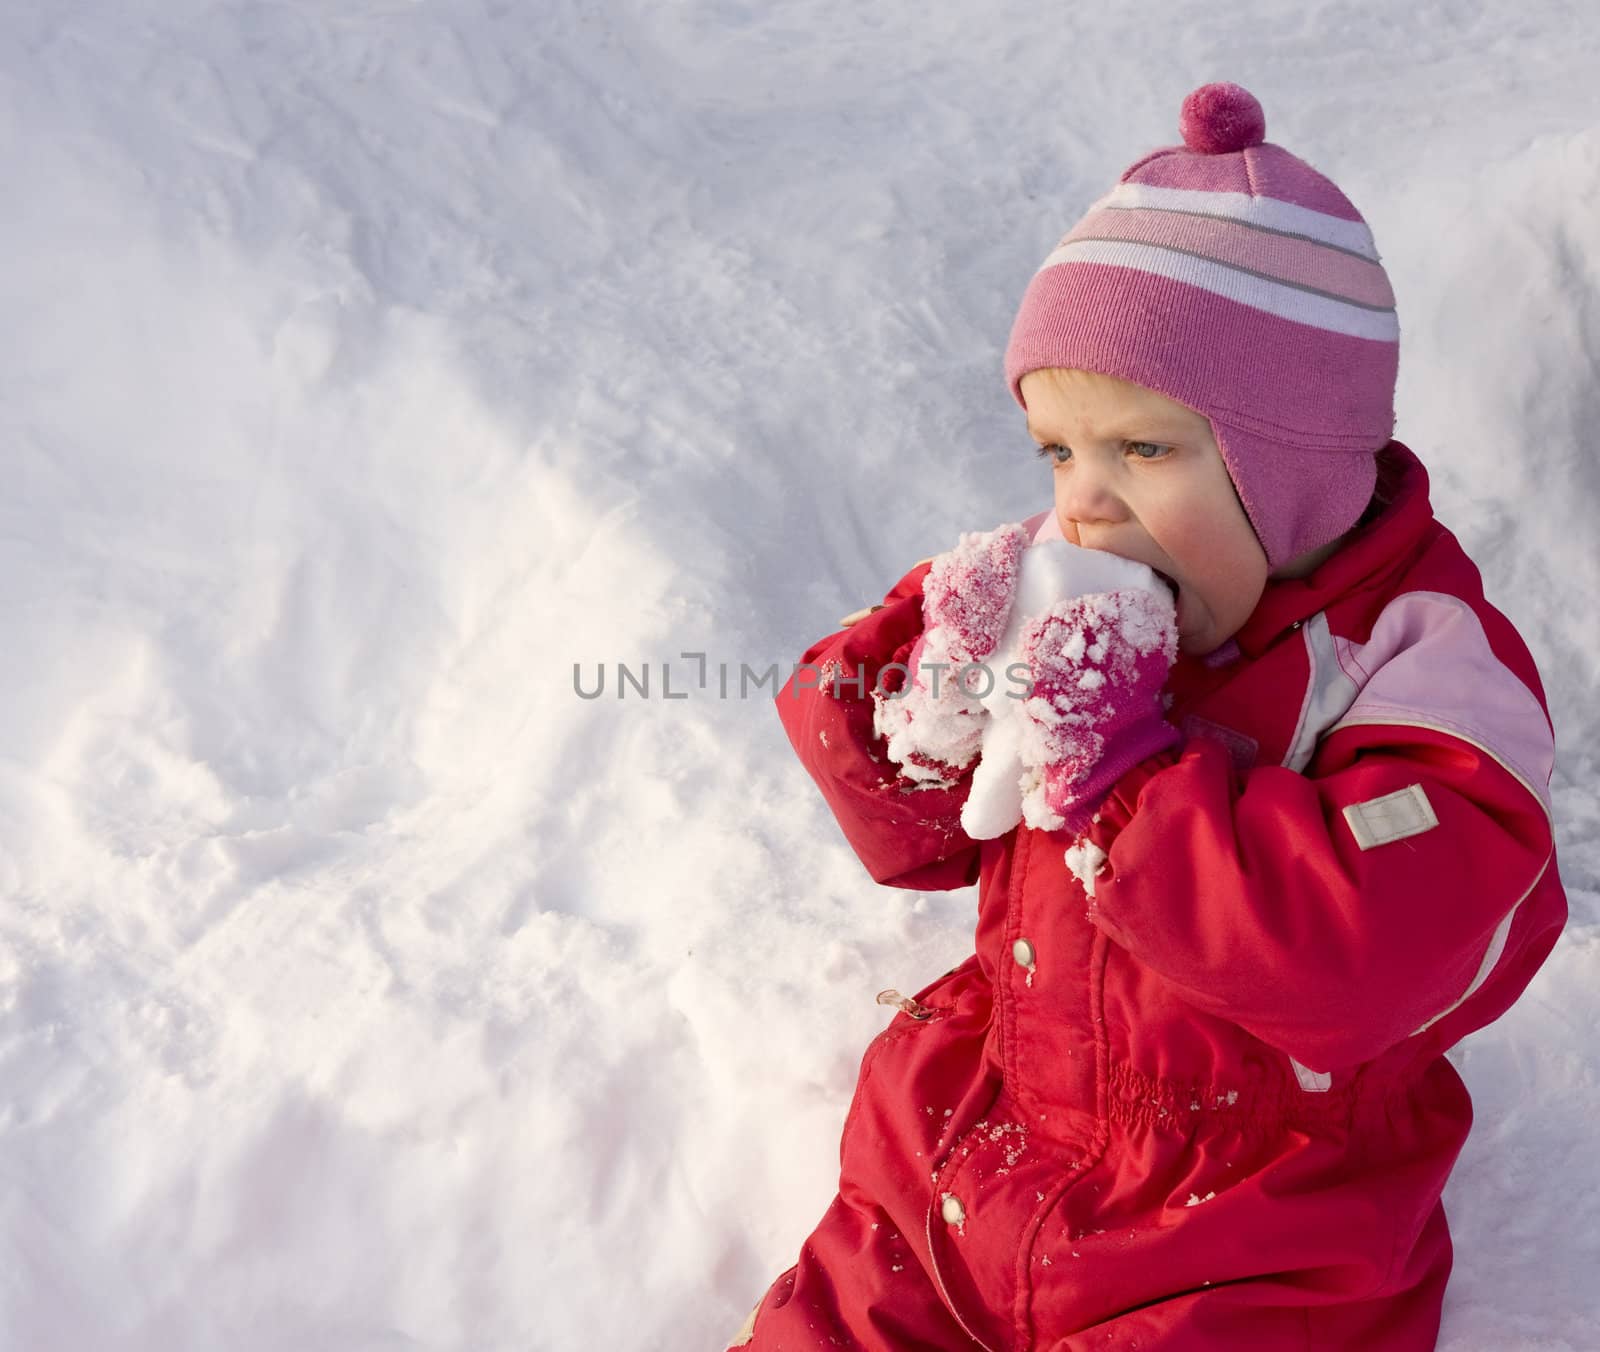 Child eating snow by kavring